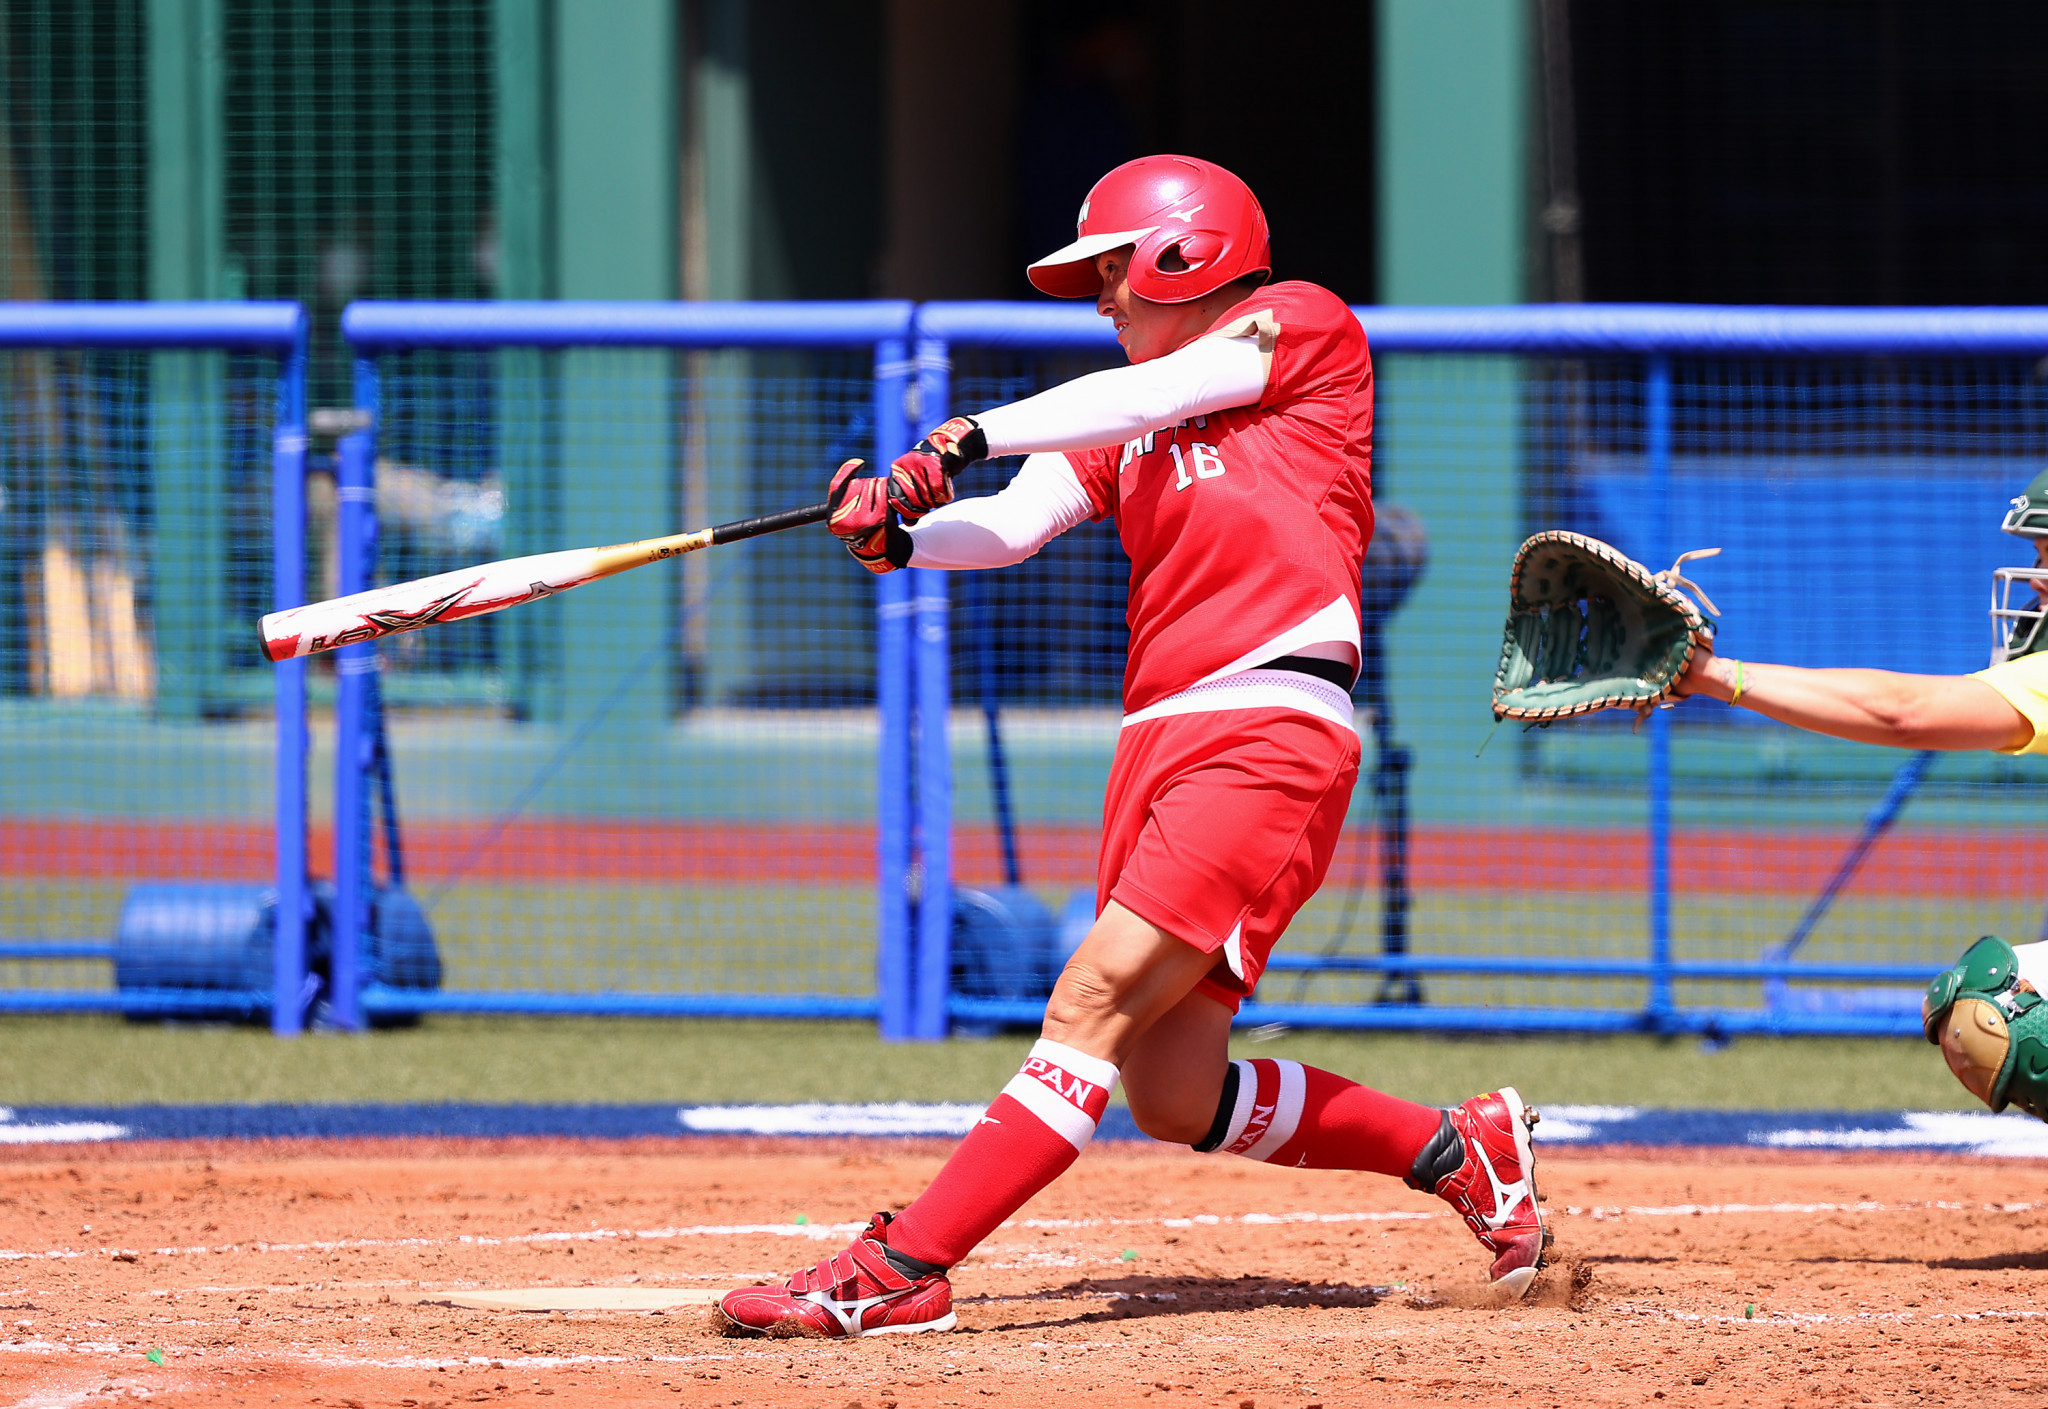 Yamato Fujita blasted one of three home runs for Japan as softball opened the 2020 Olympic Games in Fukushima ©Getty Images